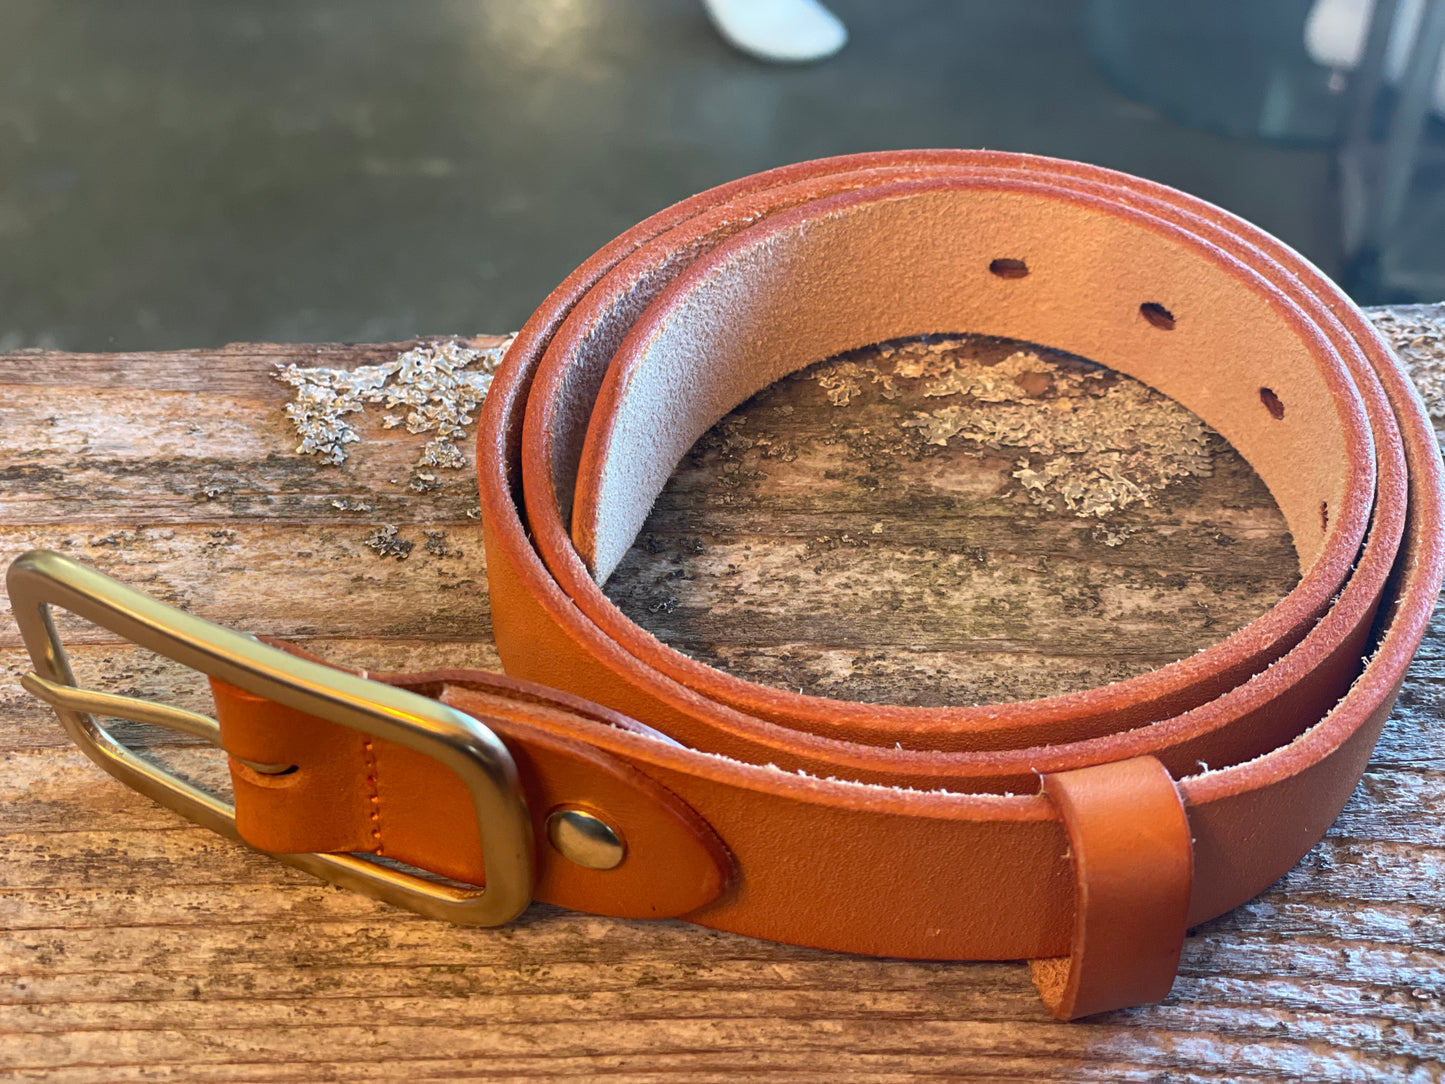 PRICKLE & POLLY Leather Belt